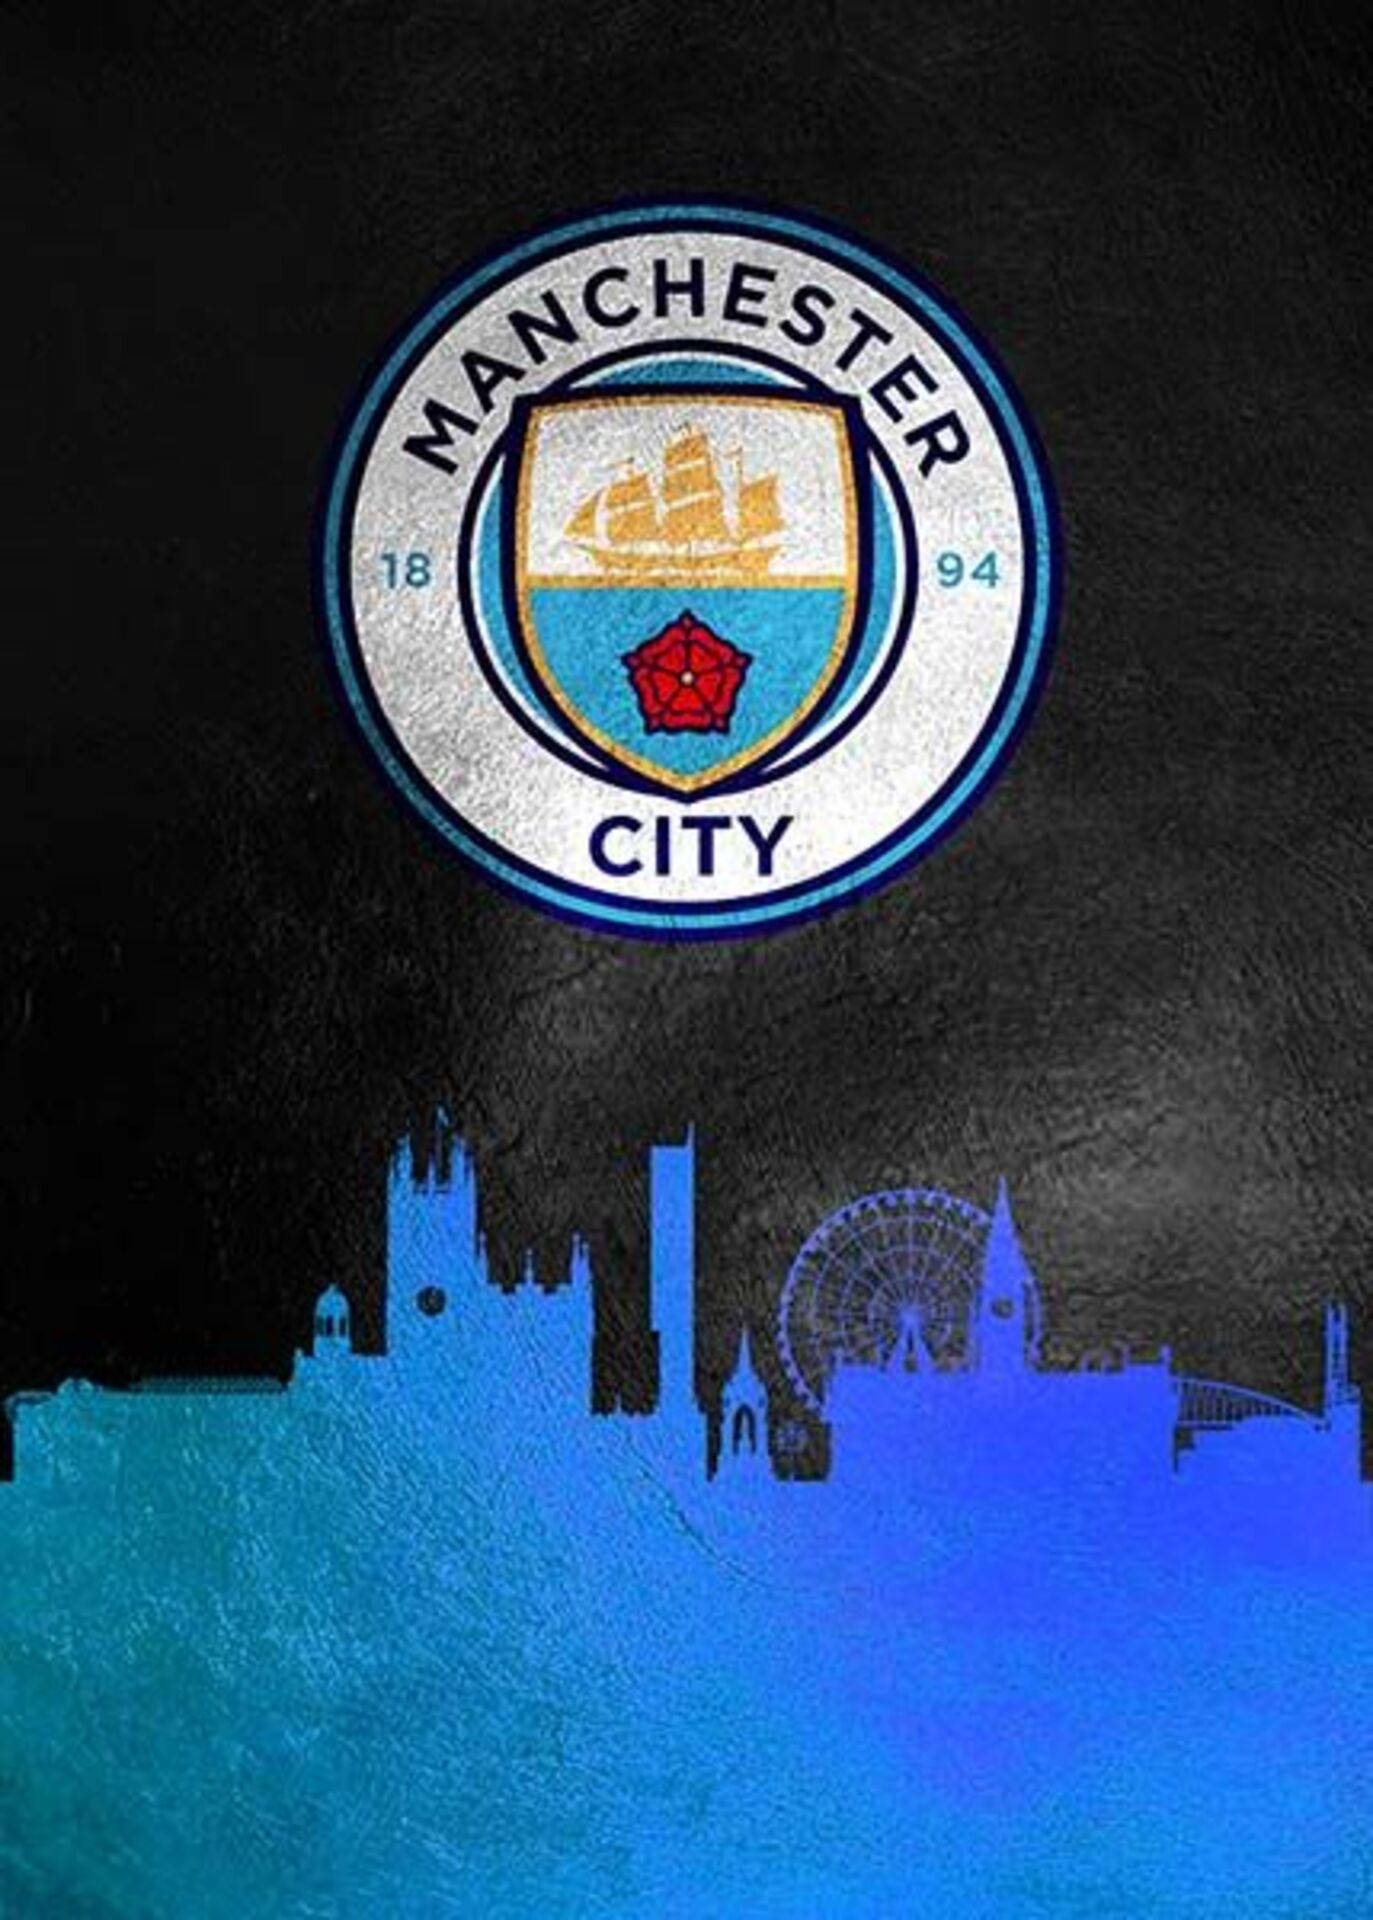 Manchester City - A city of champions Wallpaper